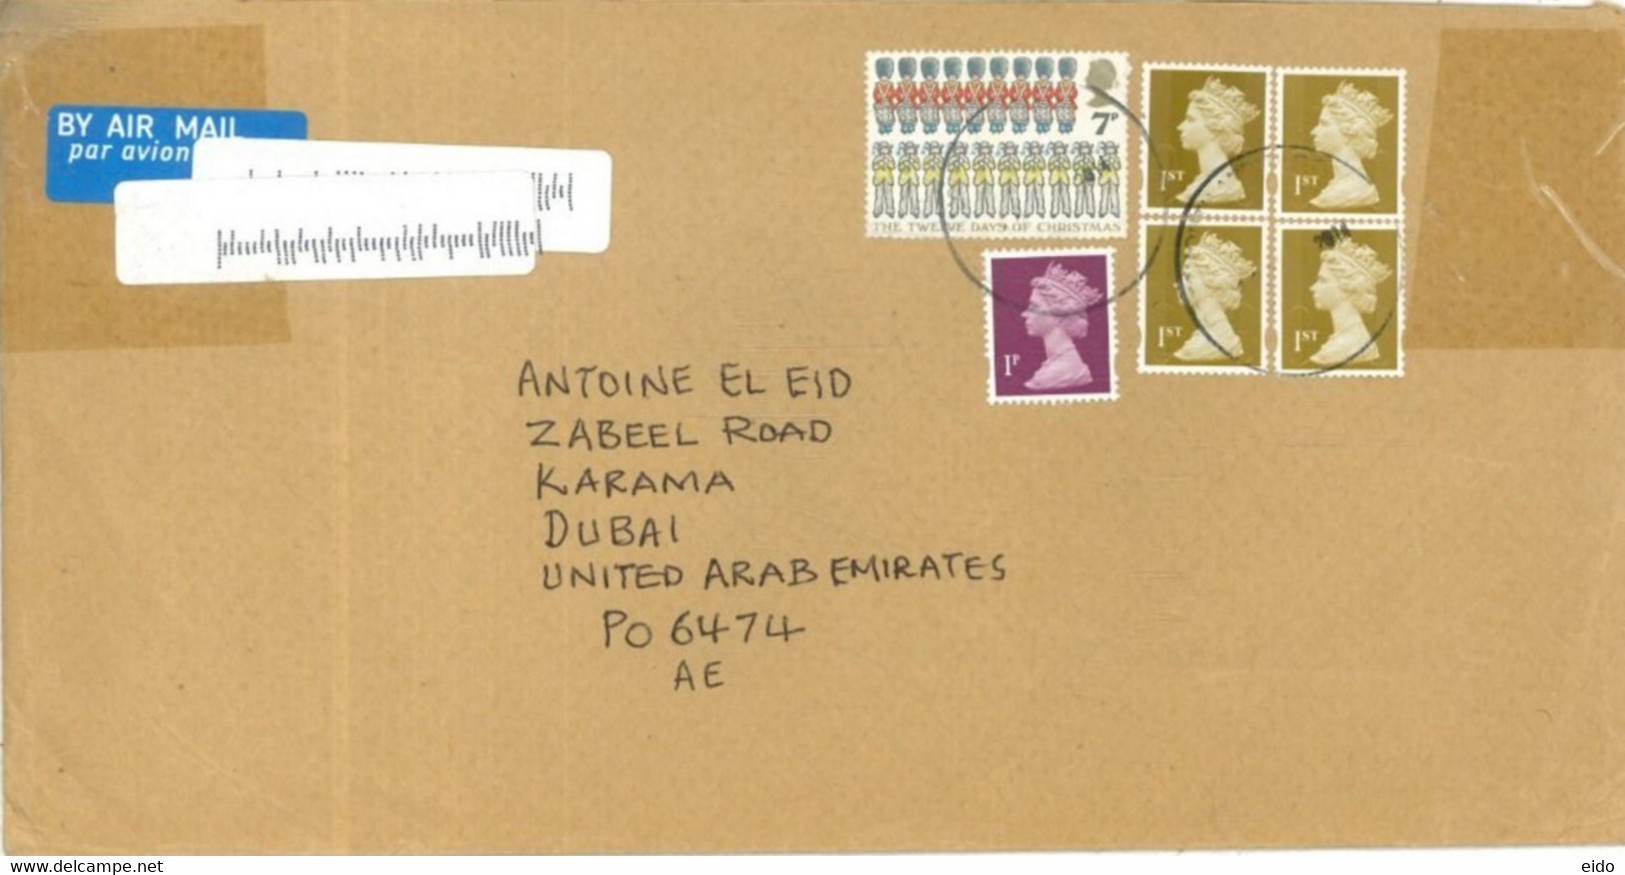 GREAT BRITAIN - 2014 - STAMPS COVER TO DUBAI. - Universal Mail Stamps